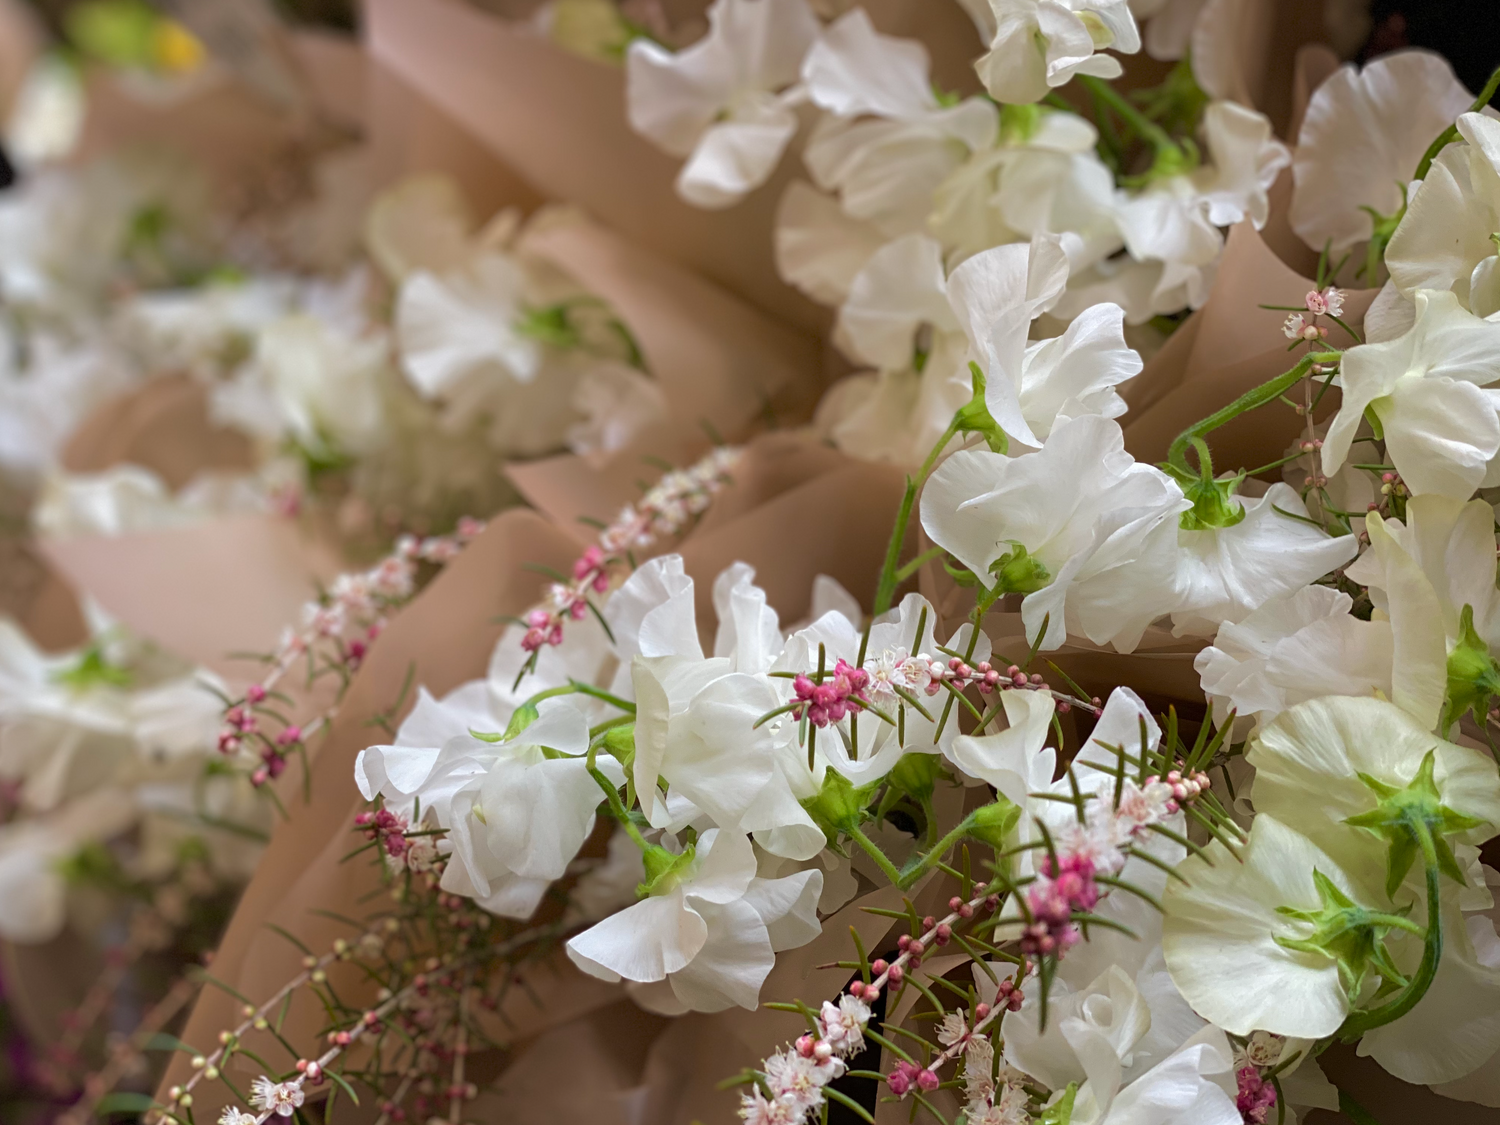 bouquets of sweet peas